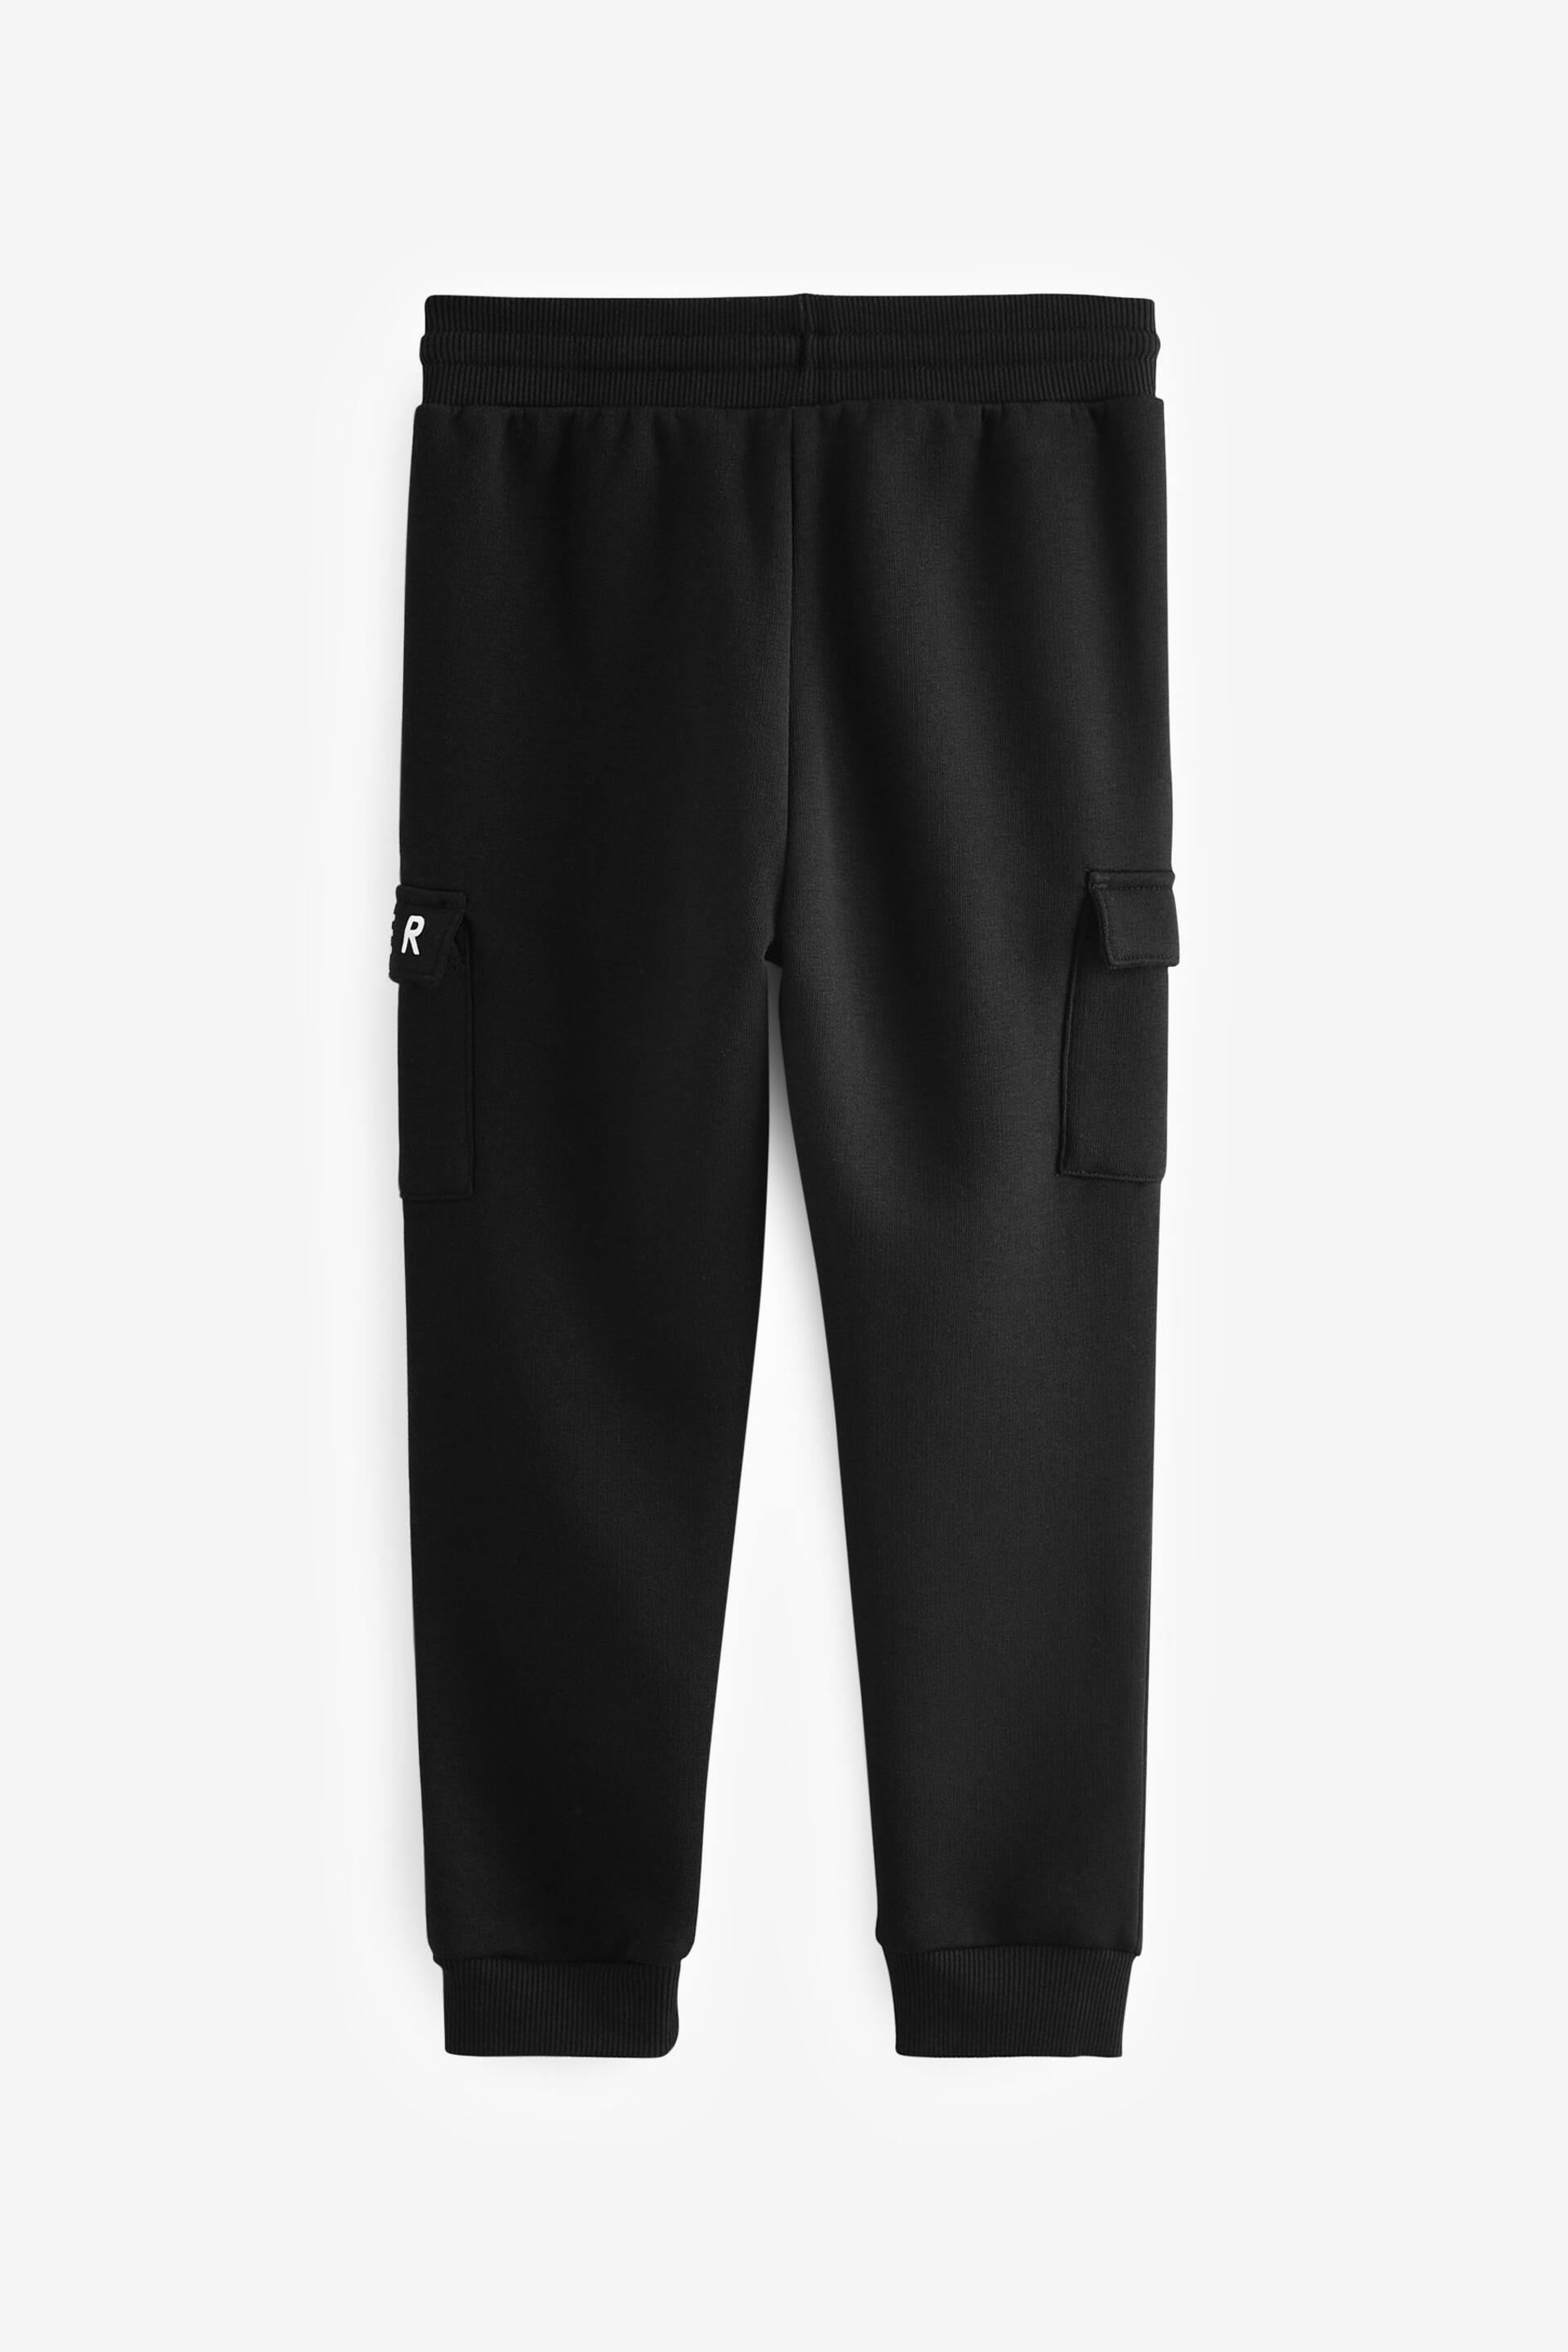 Baker by Ted Baker Cargo Joggers - Image 2 of 7